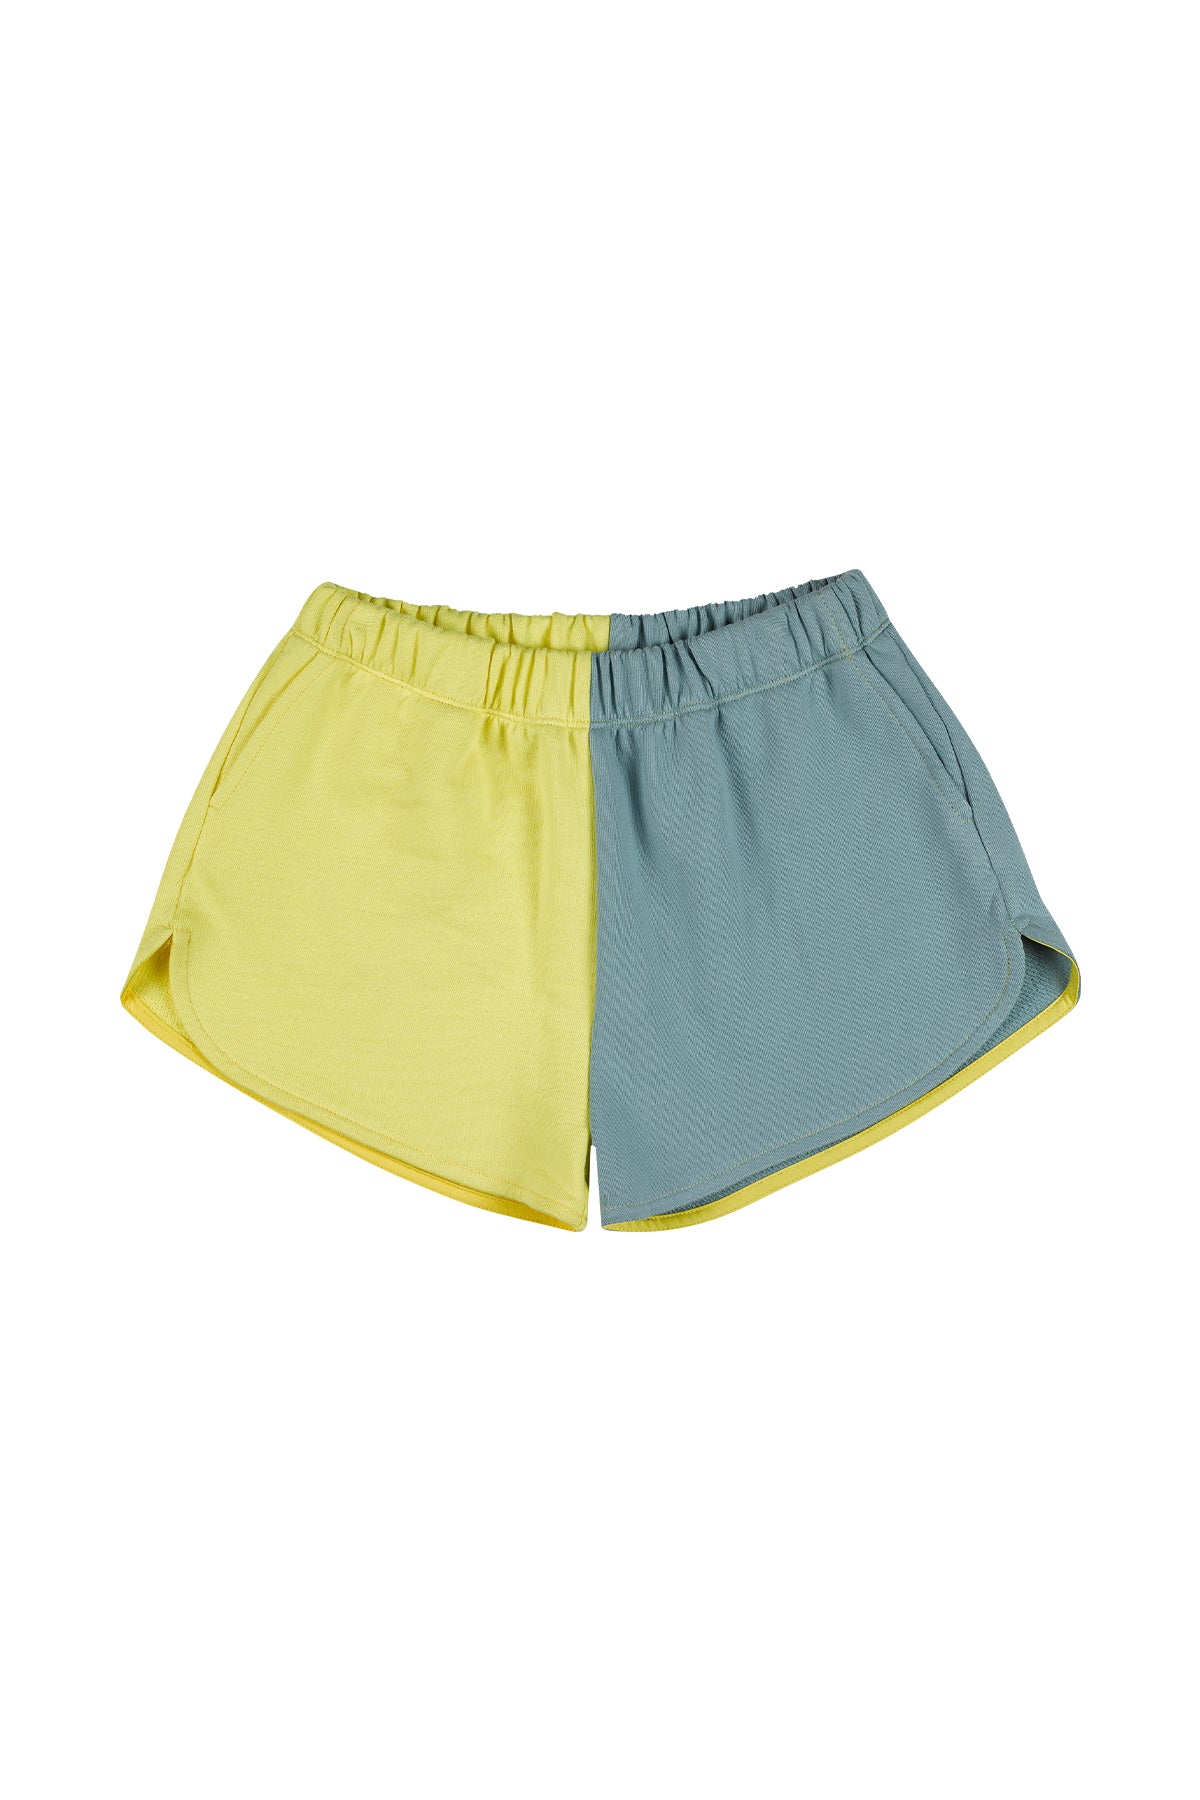 YELLOW AND TURQUOISE SHORTS ma kids